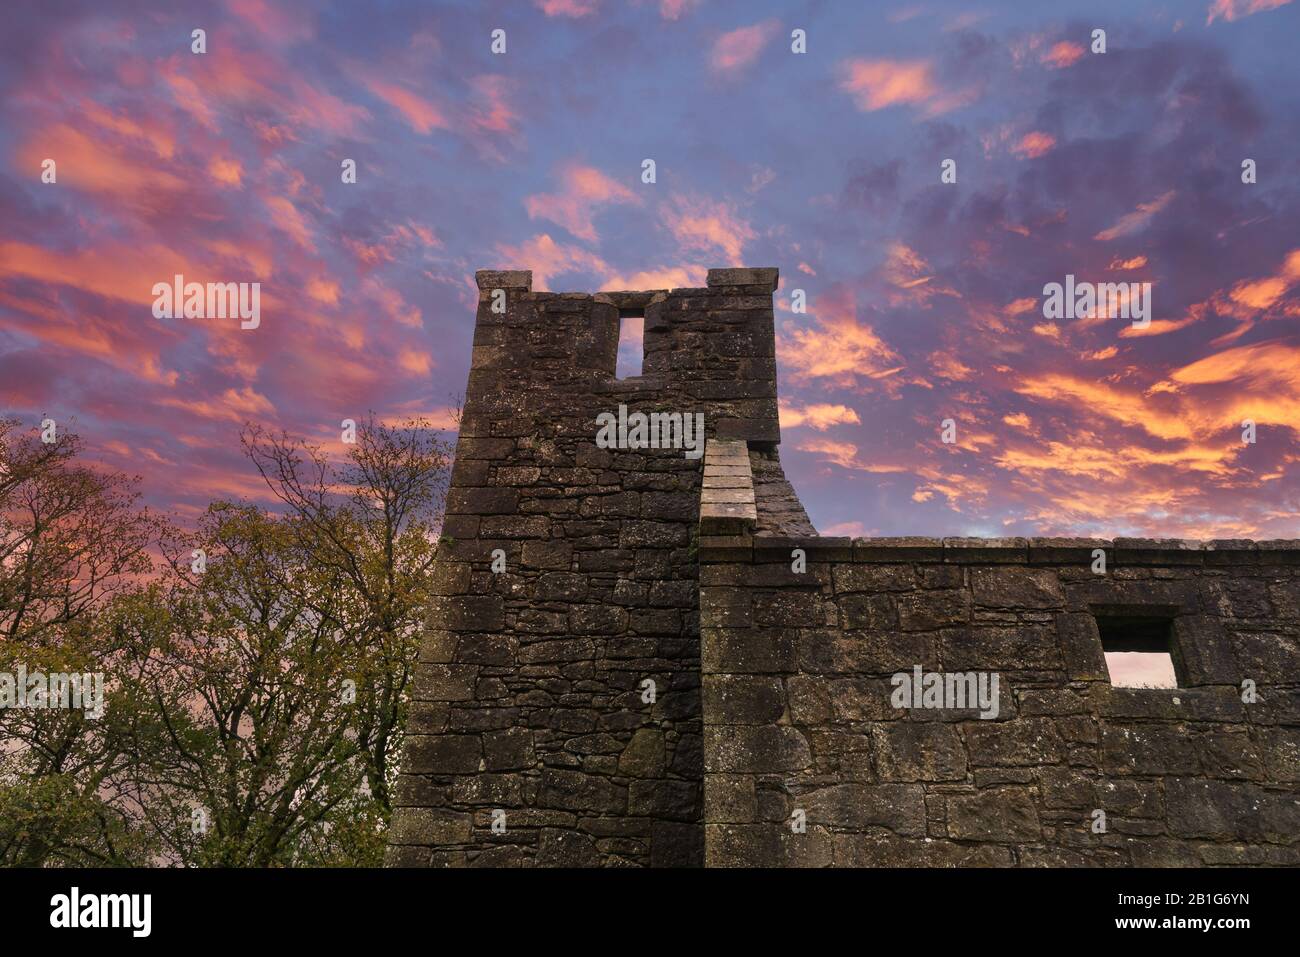 Looking up the tower of The Old Semple Ruins at Castle Semple in Renfrewshire Scotland at a Blazing Red sunset Stock Photo